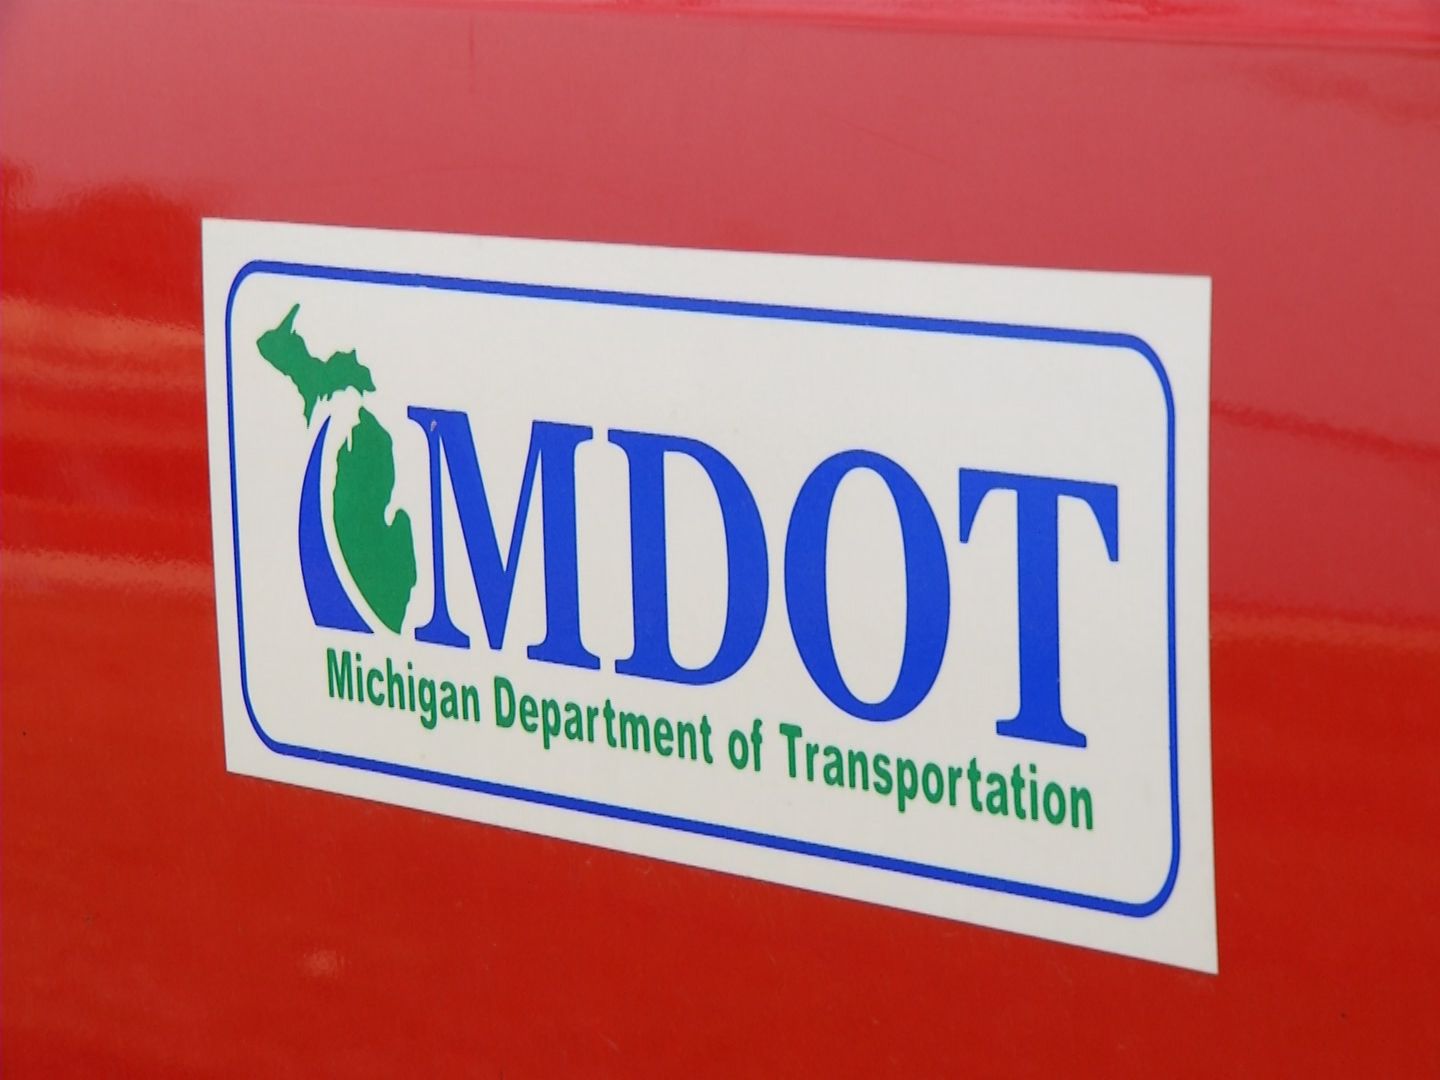 MDOT launching public survey to collect travel data vital to transportation planning in the state